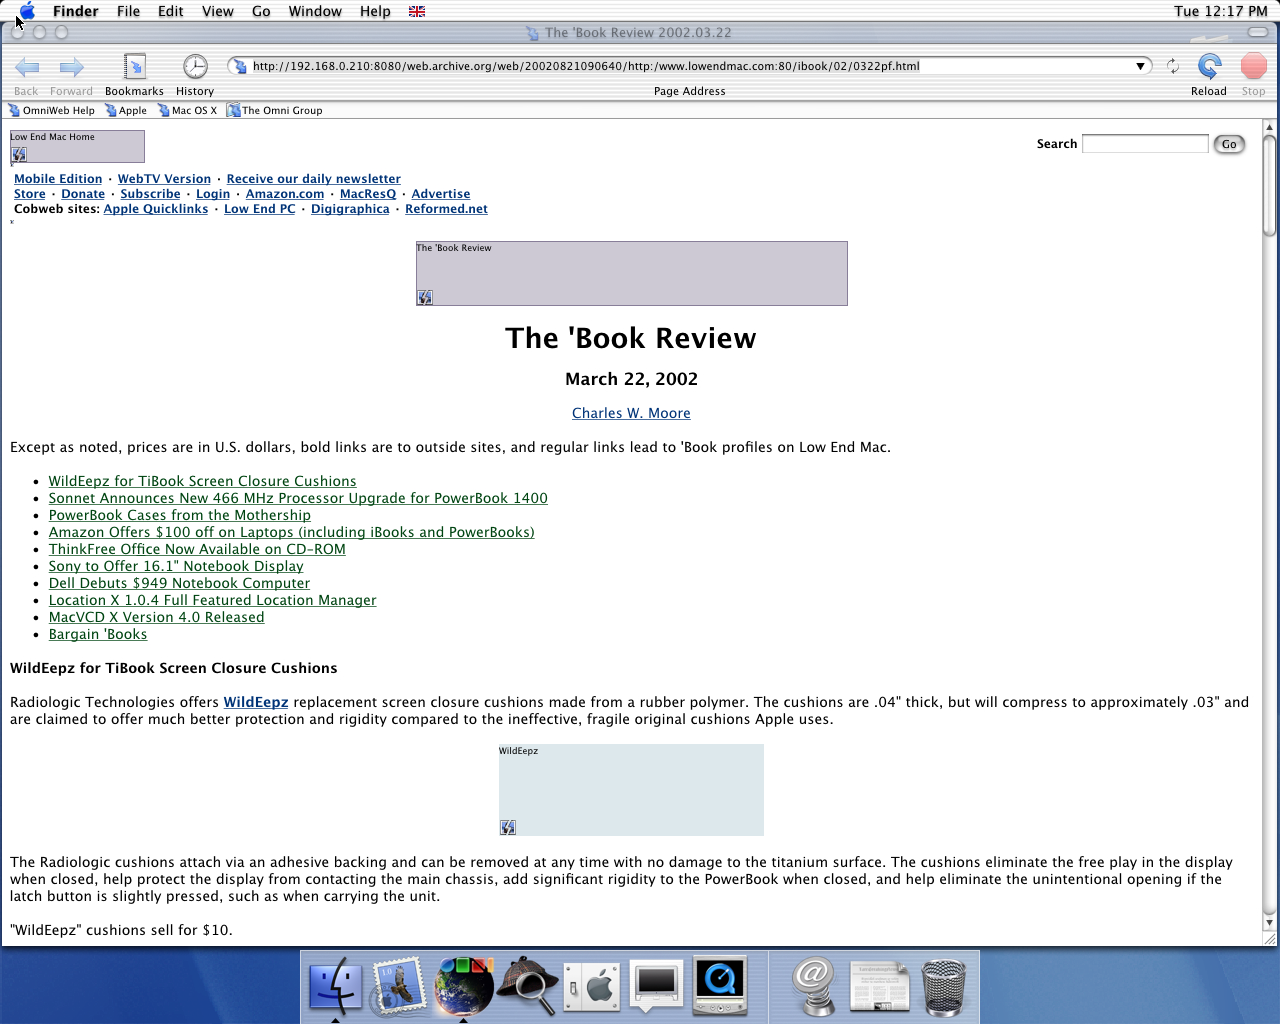 OS X 10.0 PPC with OmniWeb 4.0 displaying a page from Low End Mac archived at August 21, 2002 at 09:06:40